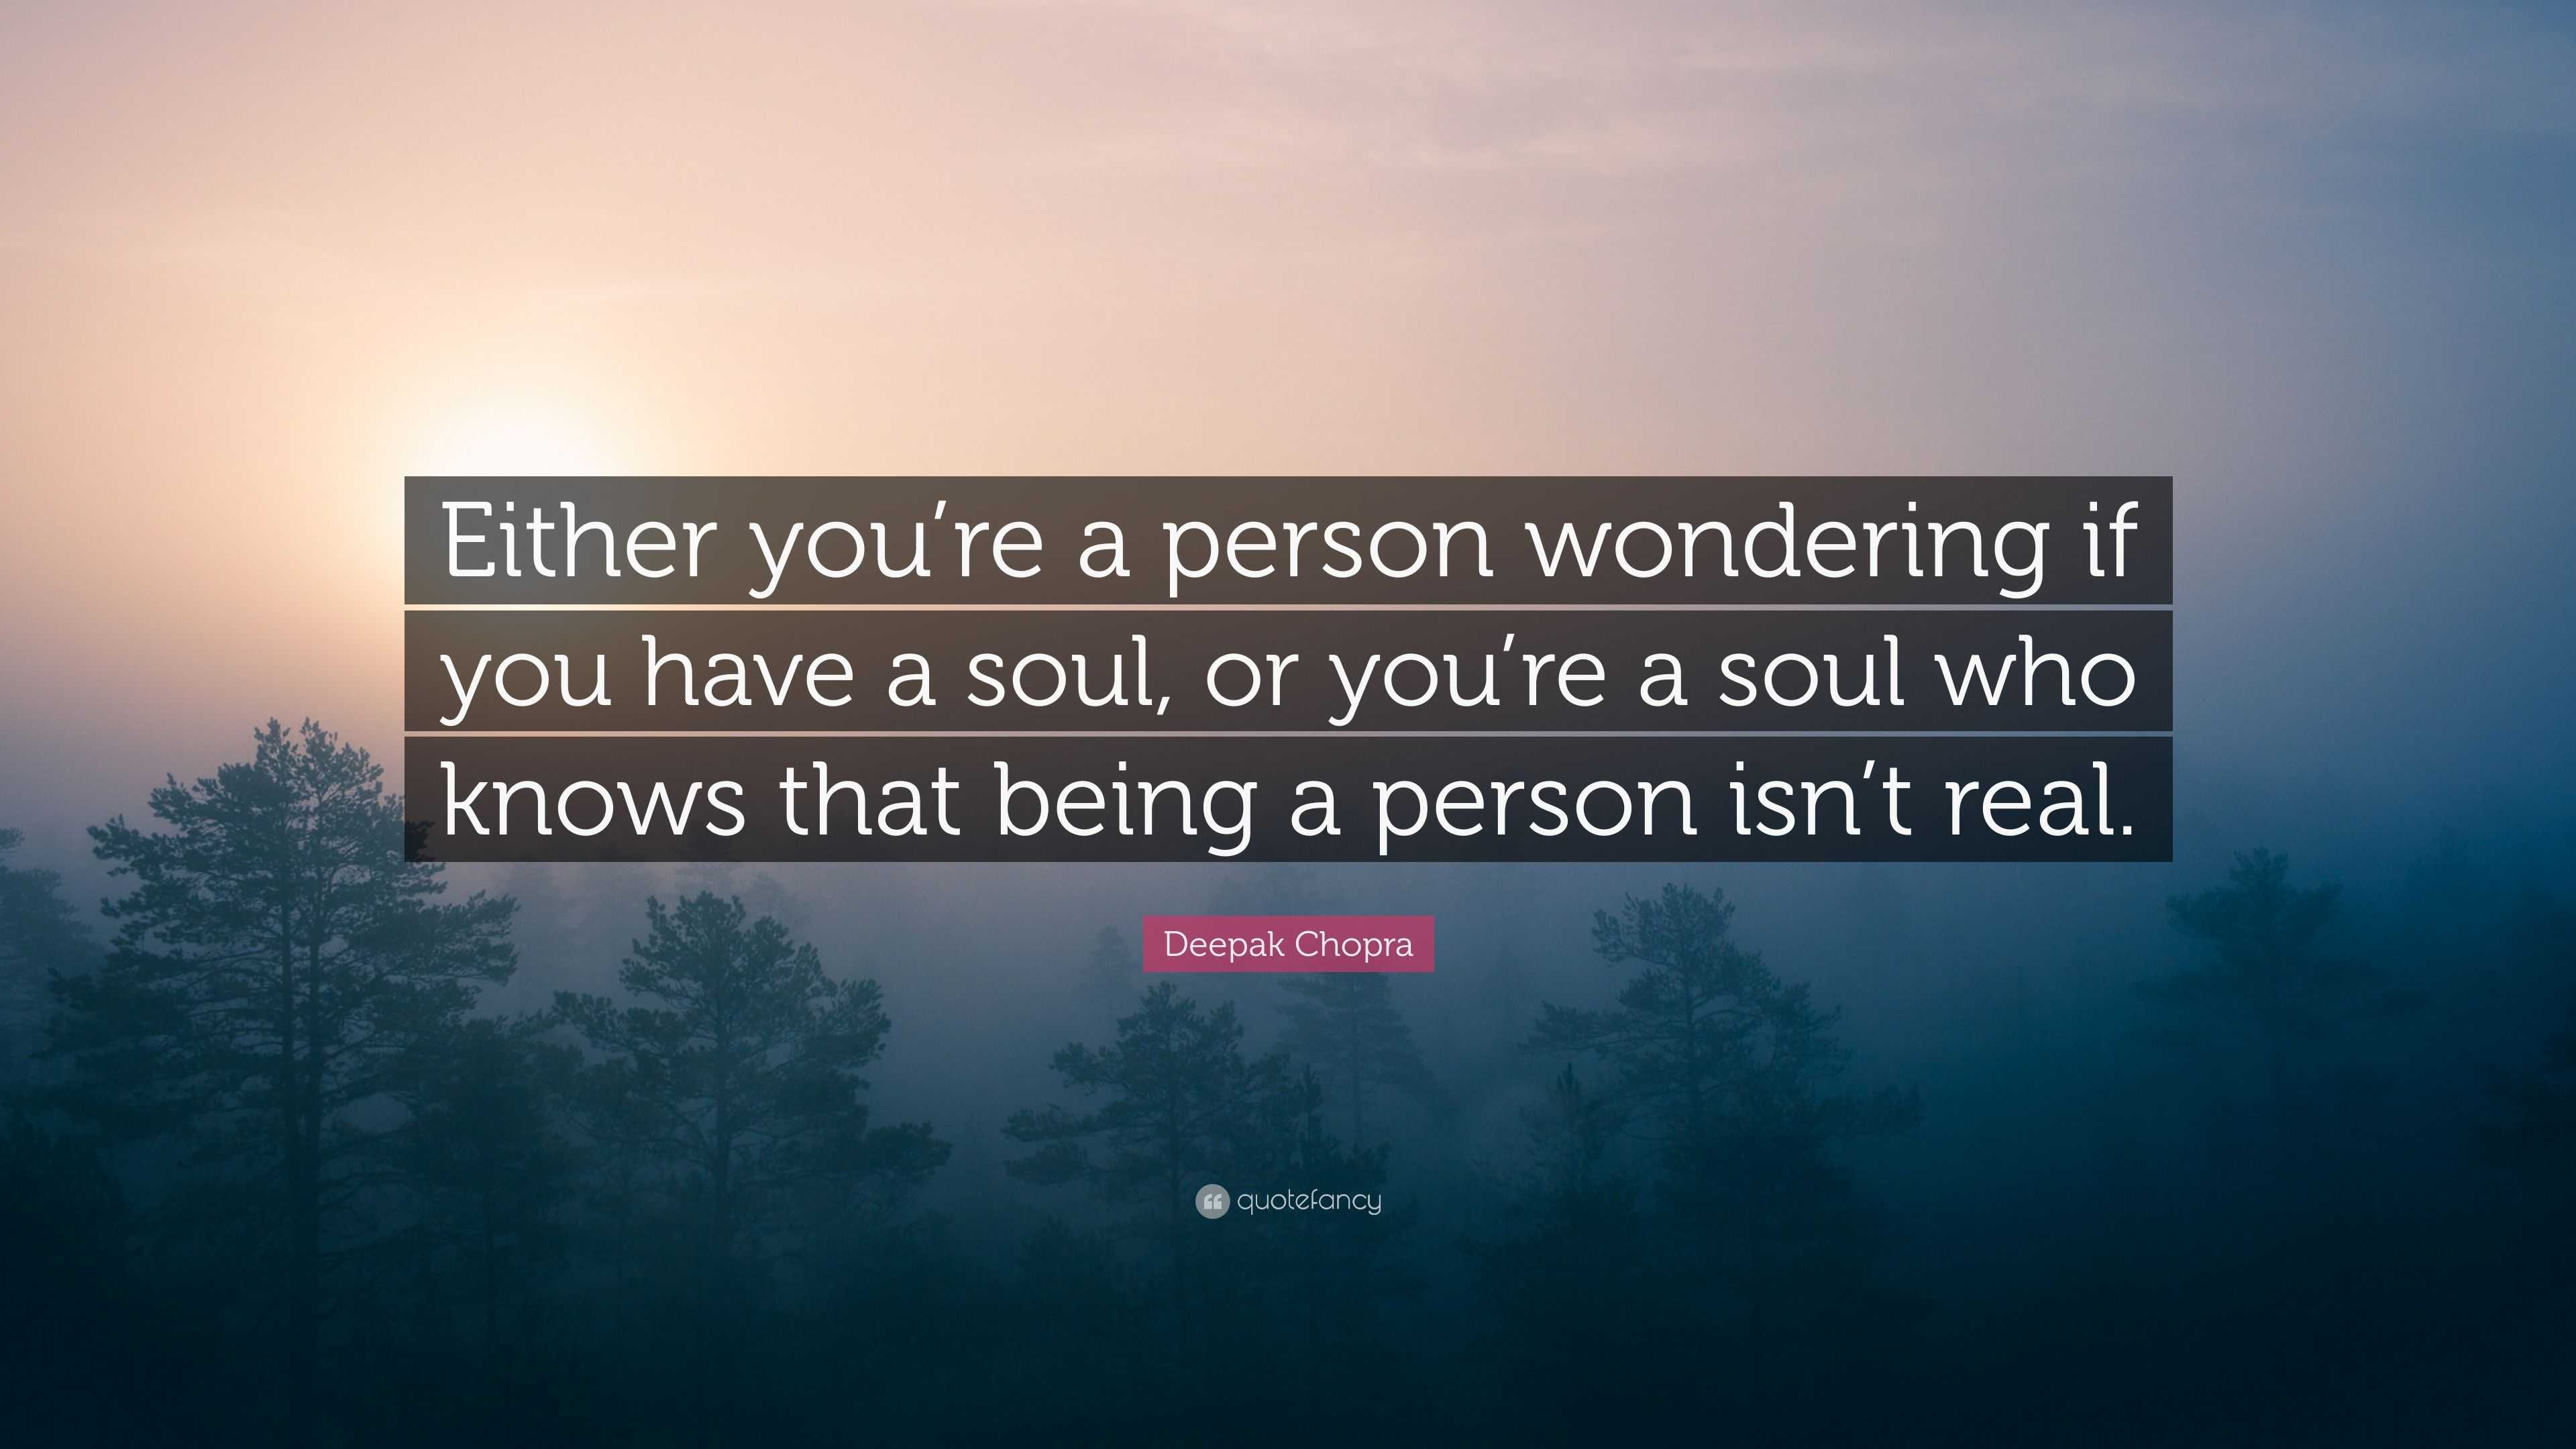 Deepak Chopra Quote: “Either you’re a person wondering if you have a ...